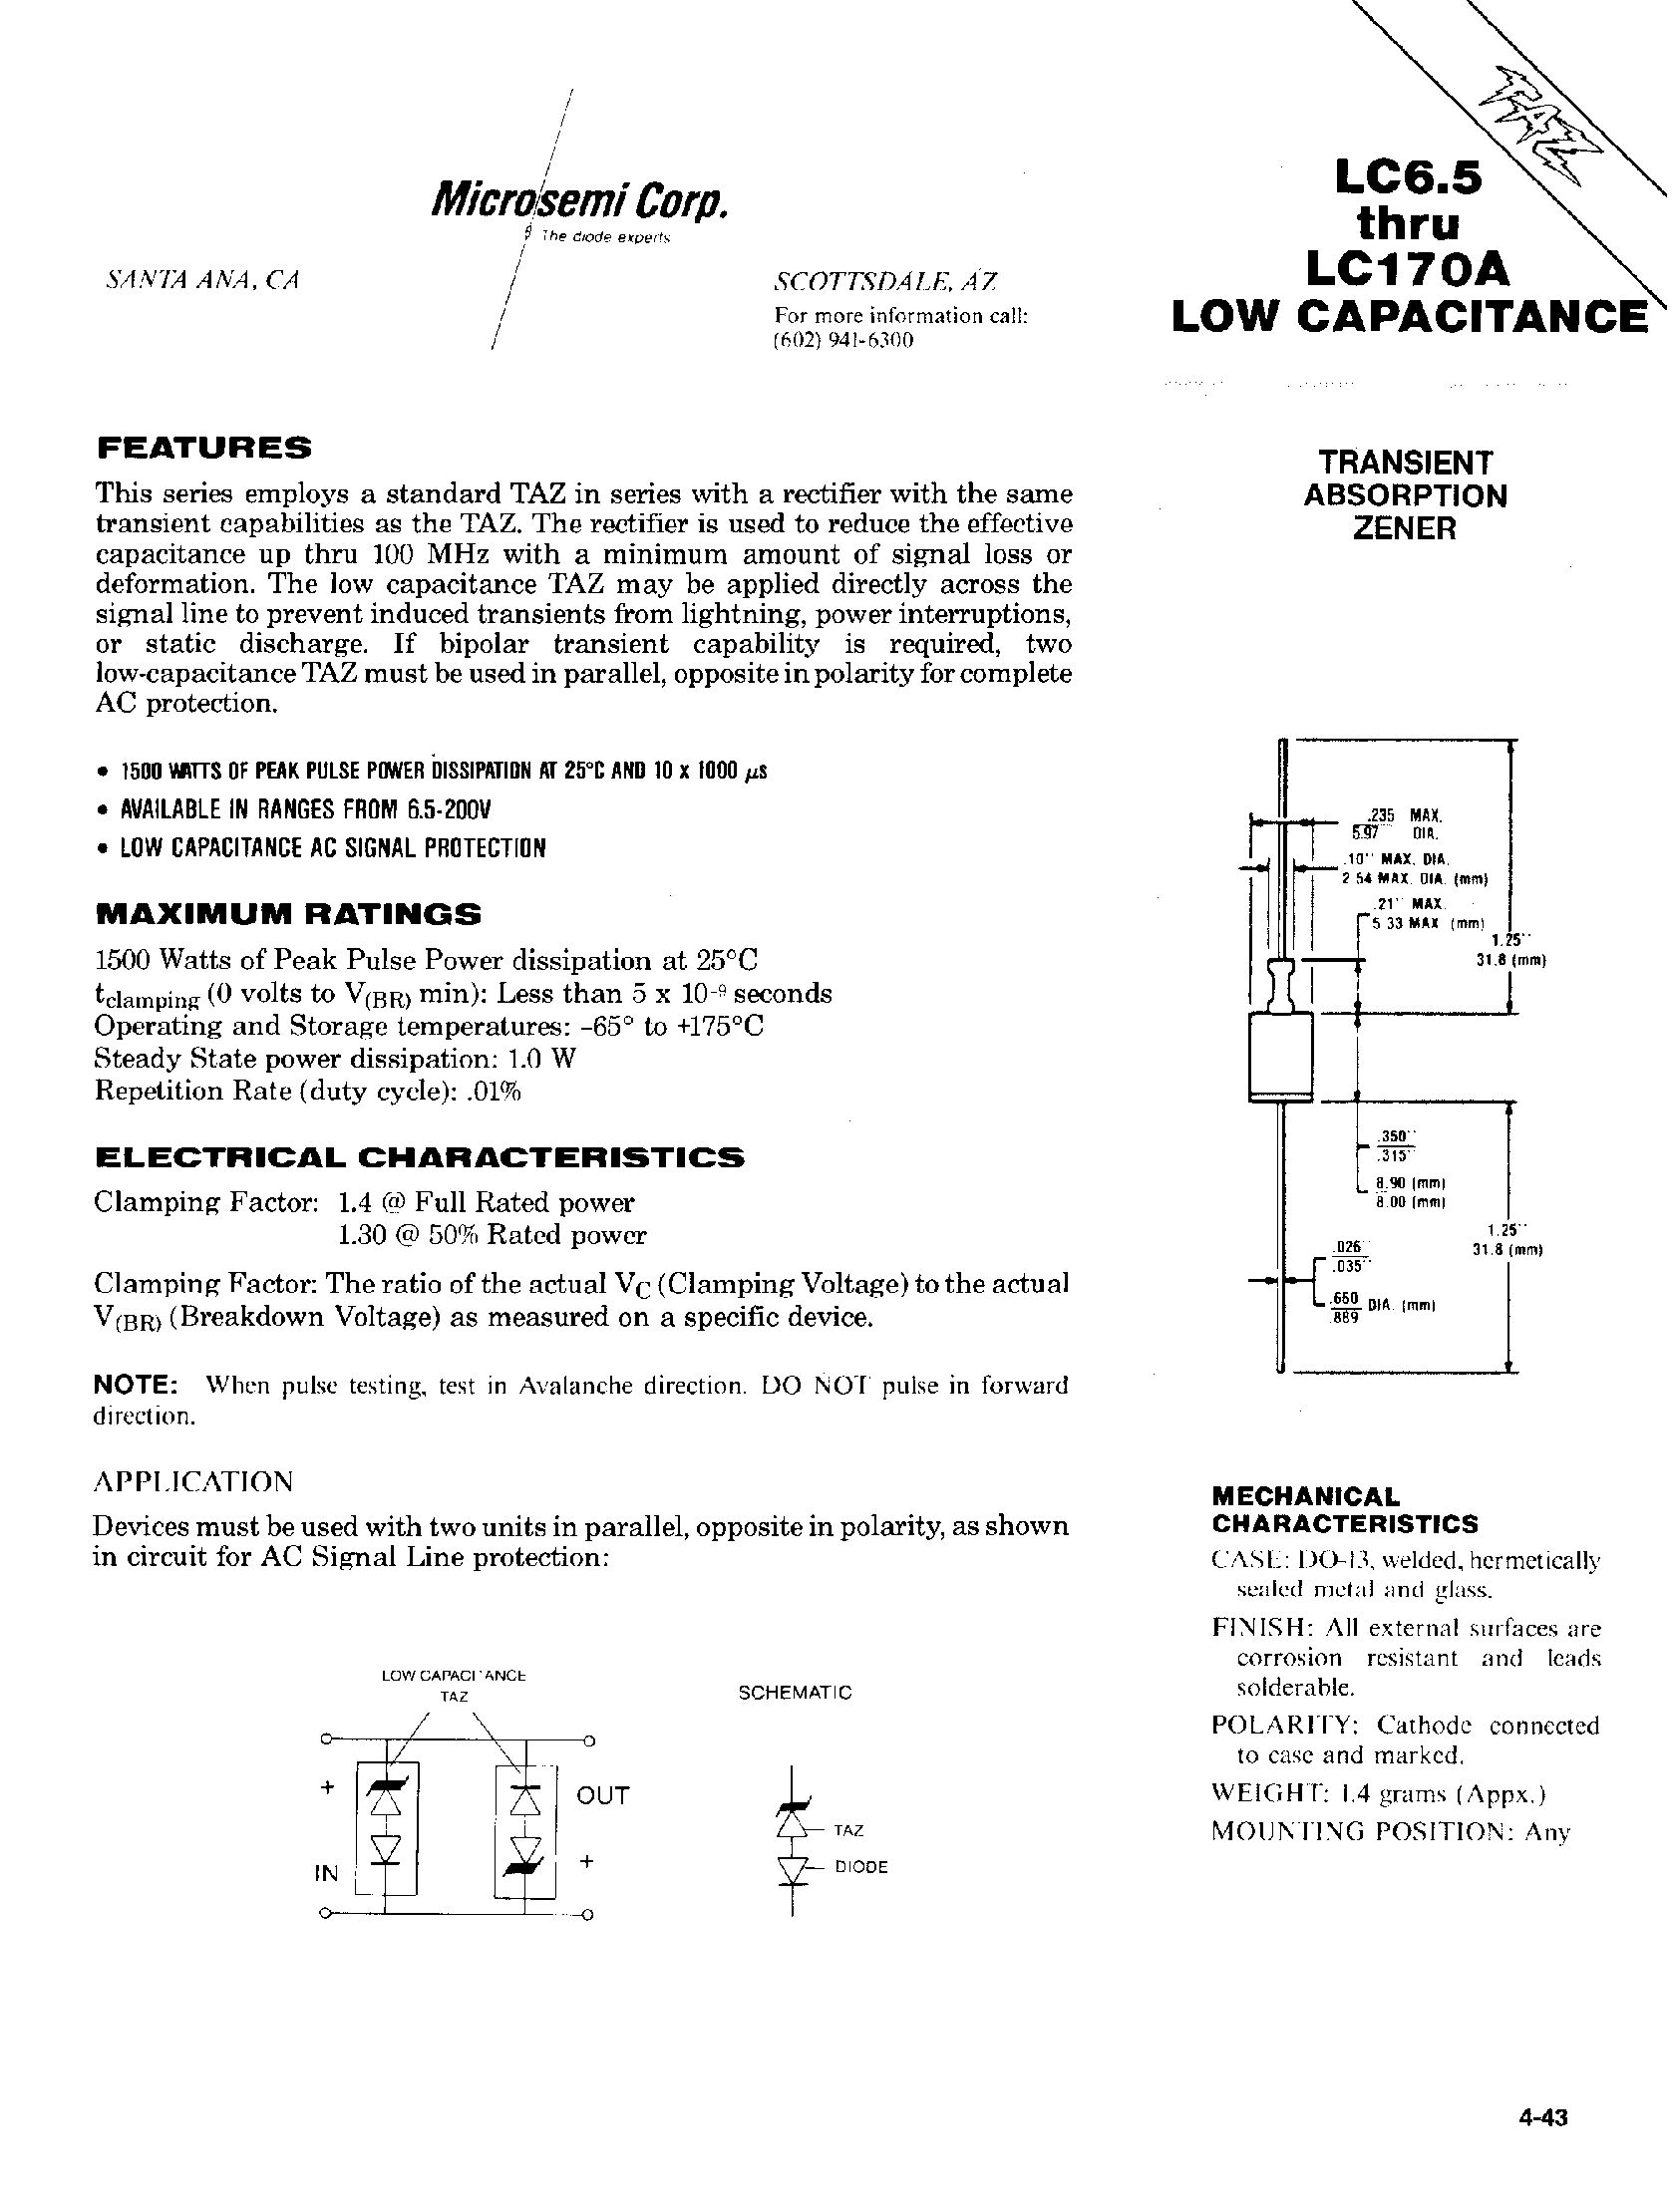 Datasheet LC110A - TRANSIENT ABSORPTION ZENER page 1